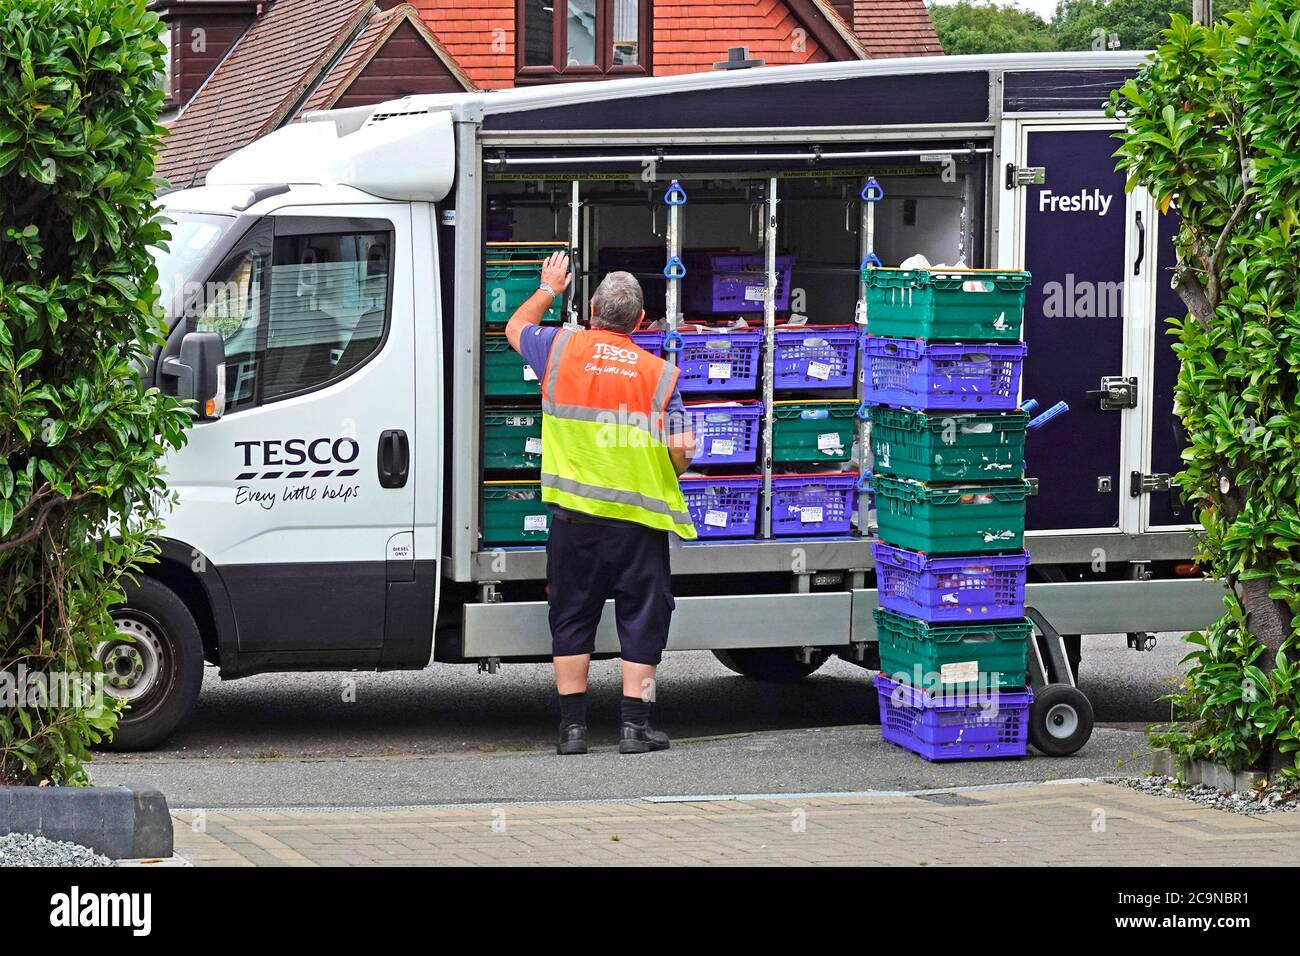 tesco delivery –